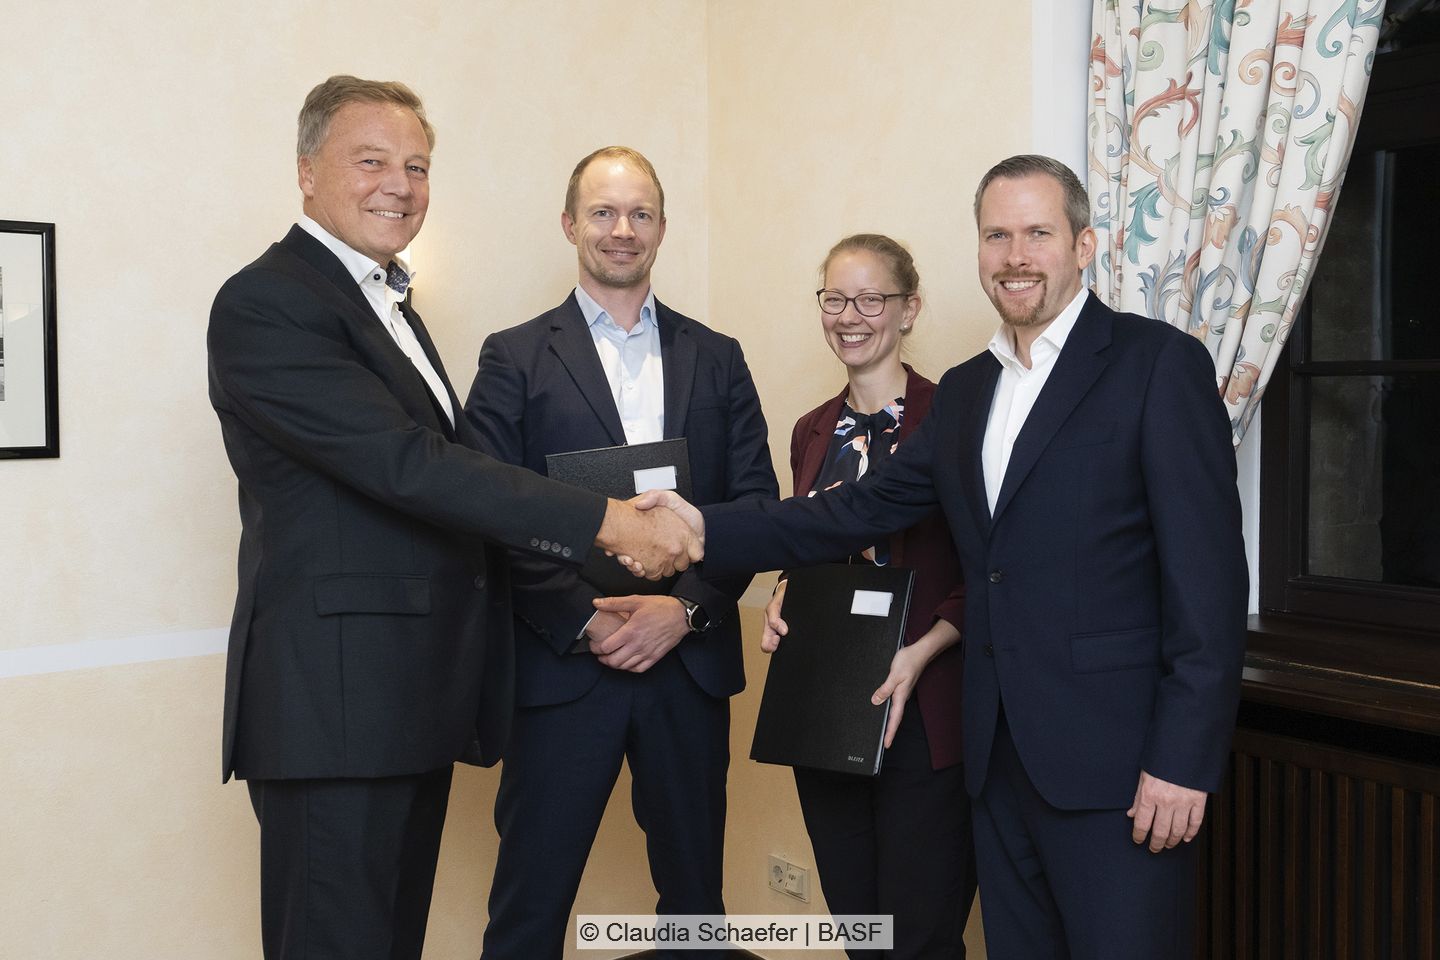 From left to right: Mats Berneblad (Sales Manager Electronics and Battery materials, Stena Recycling Group), Marcus Martinsson (Product Area Manager Batteries, Stena Recycling Group), Birgit Gerke (Procurement Manager Battery Recycling, BASF), Daniel Schönfelder (President of Catalysts Division, head of battery materials and recycling, BASF).